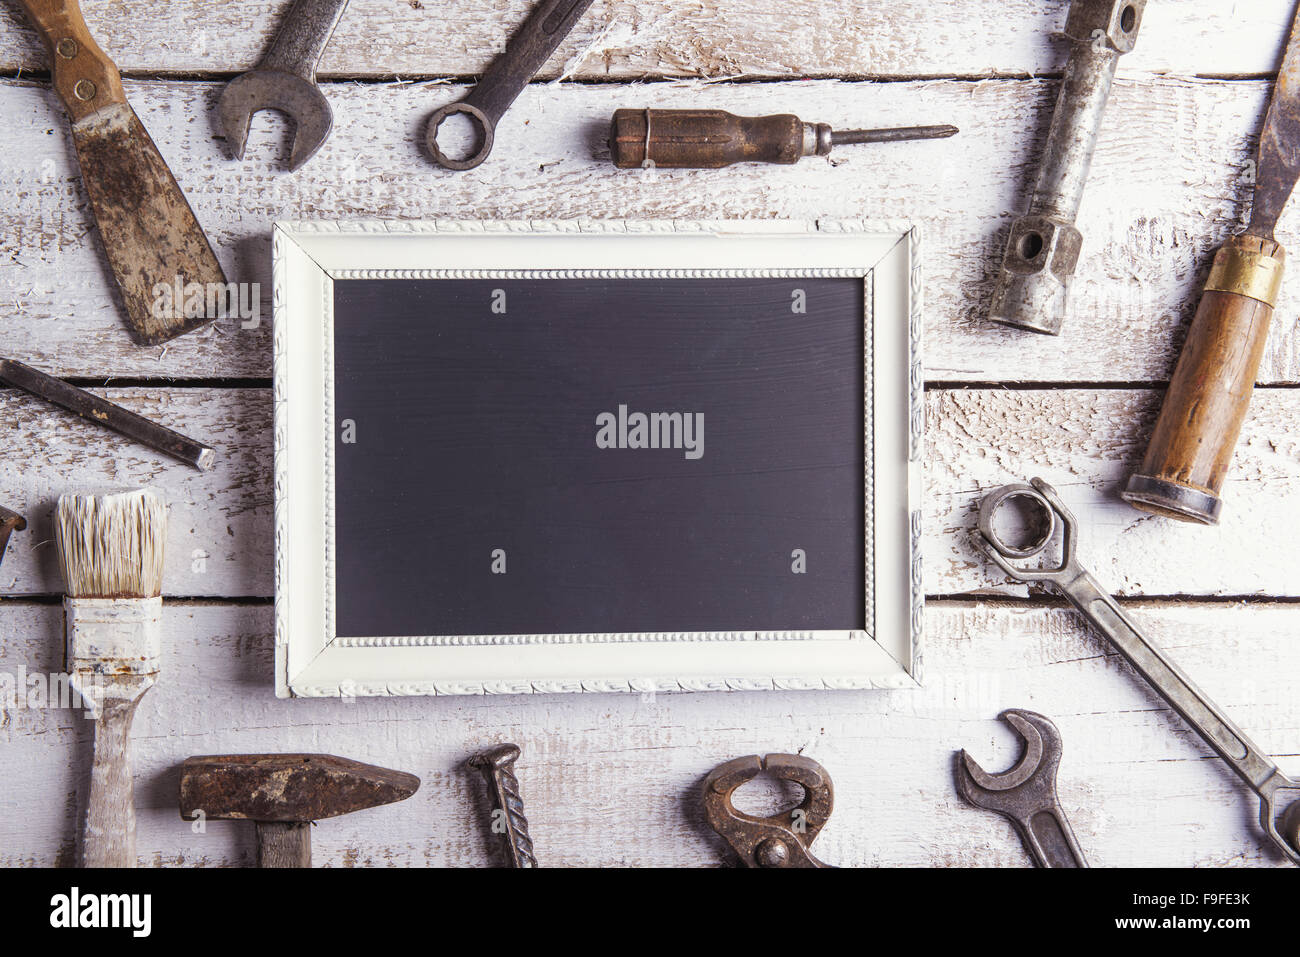 Empty picture frame and work tools. Studio shot on a wooden background. Stock Photo